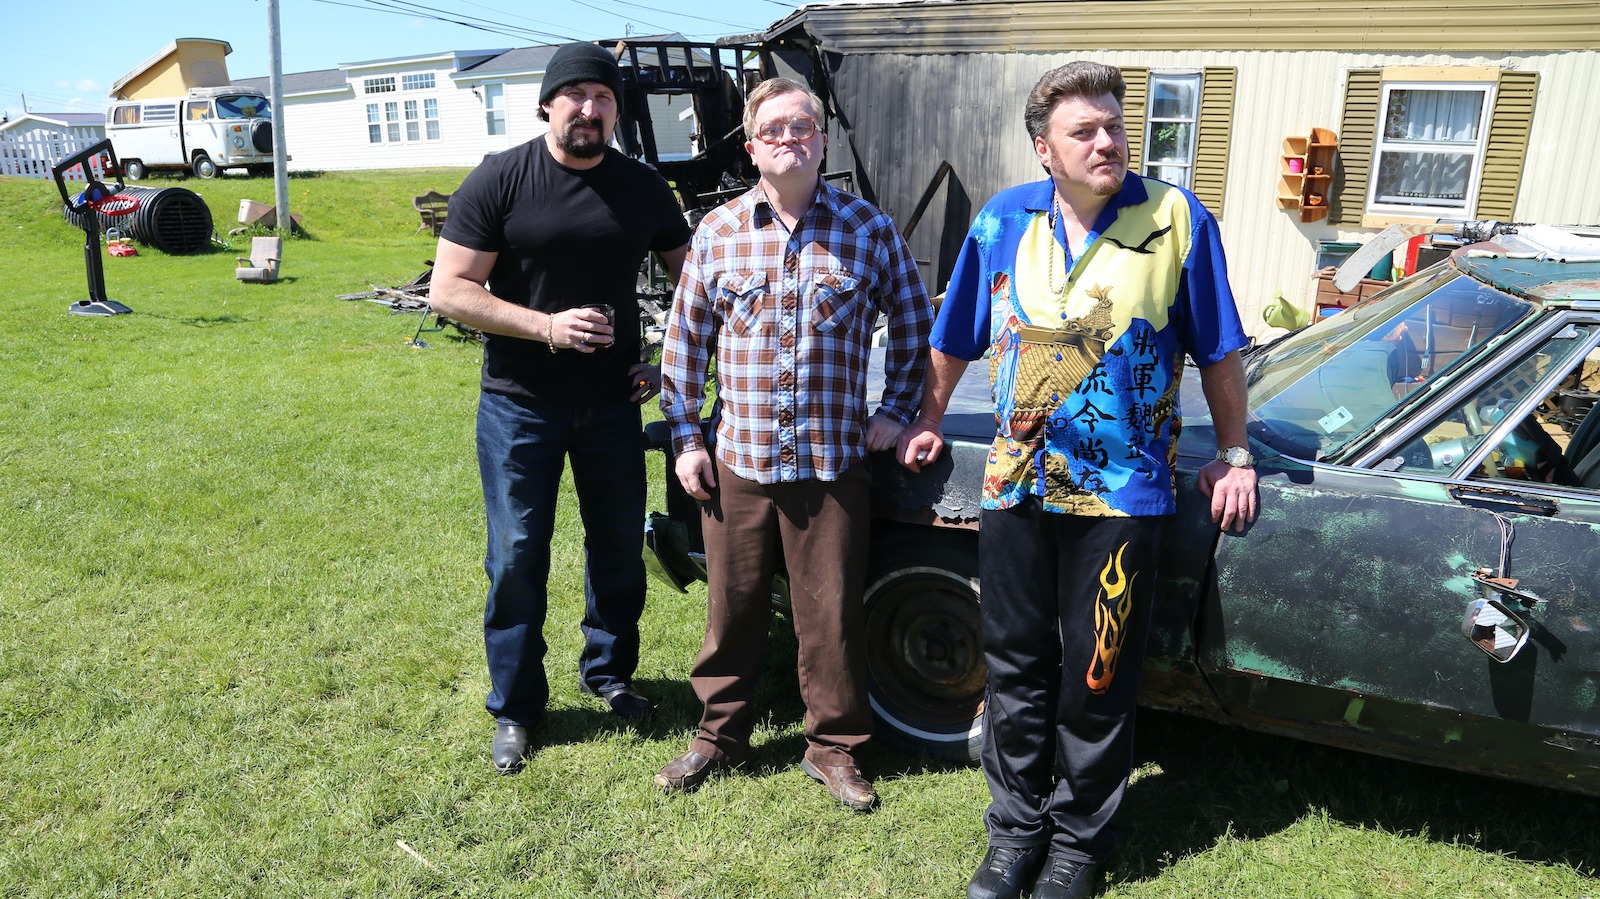 The absolute best Rickyisms from Trailer Park Boys